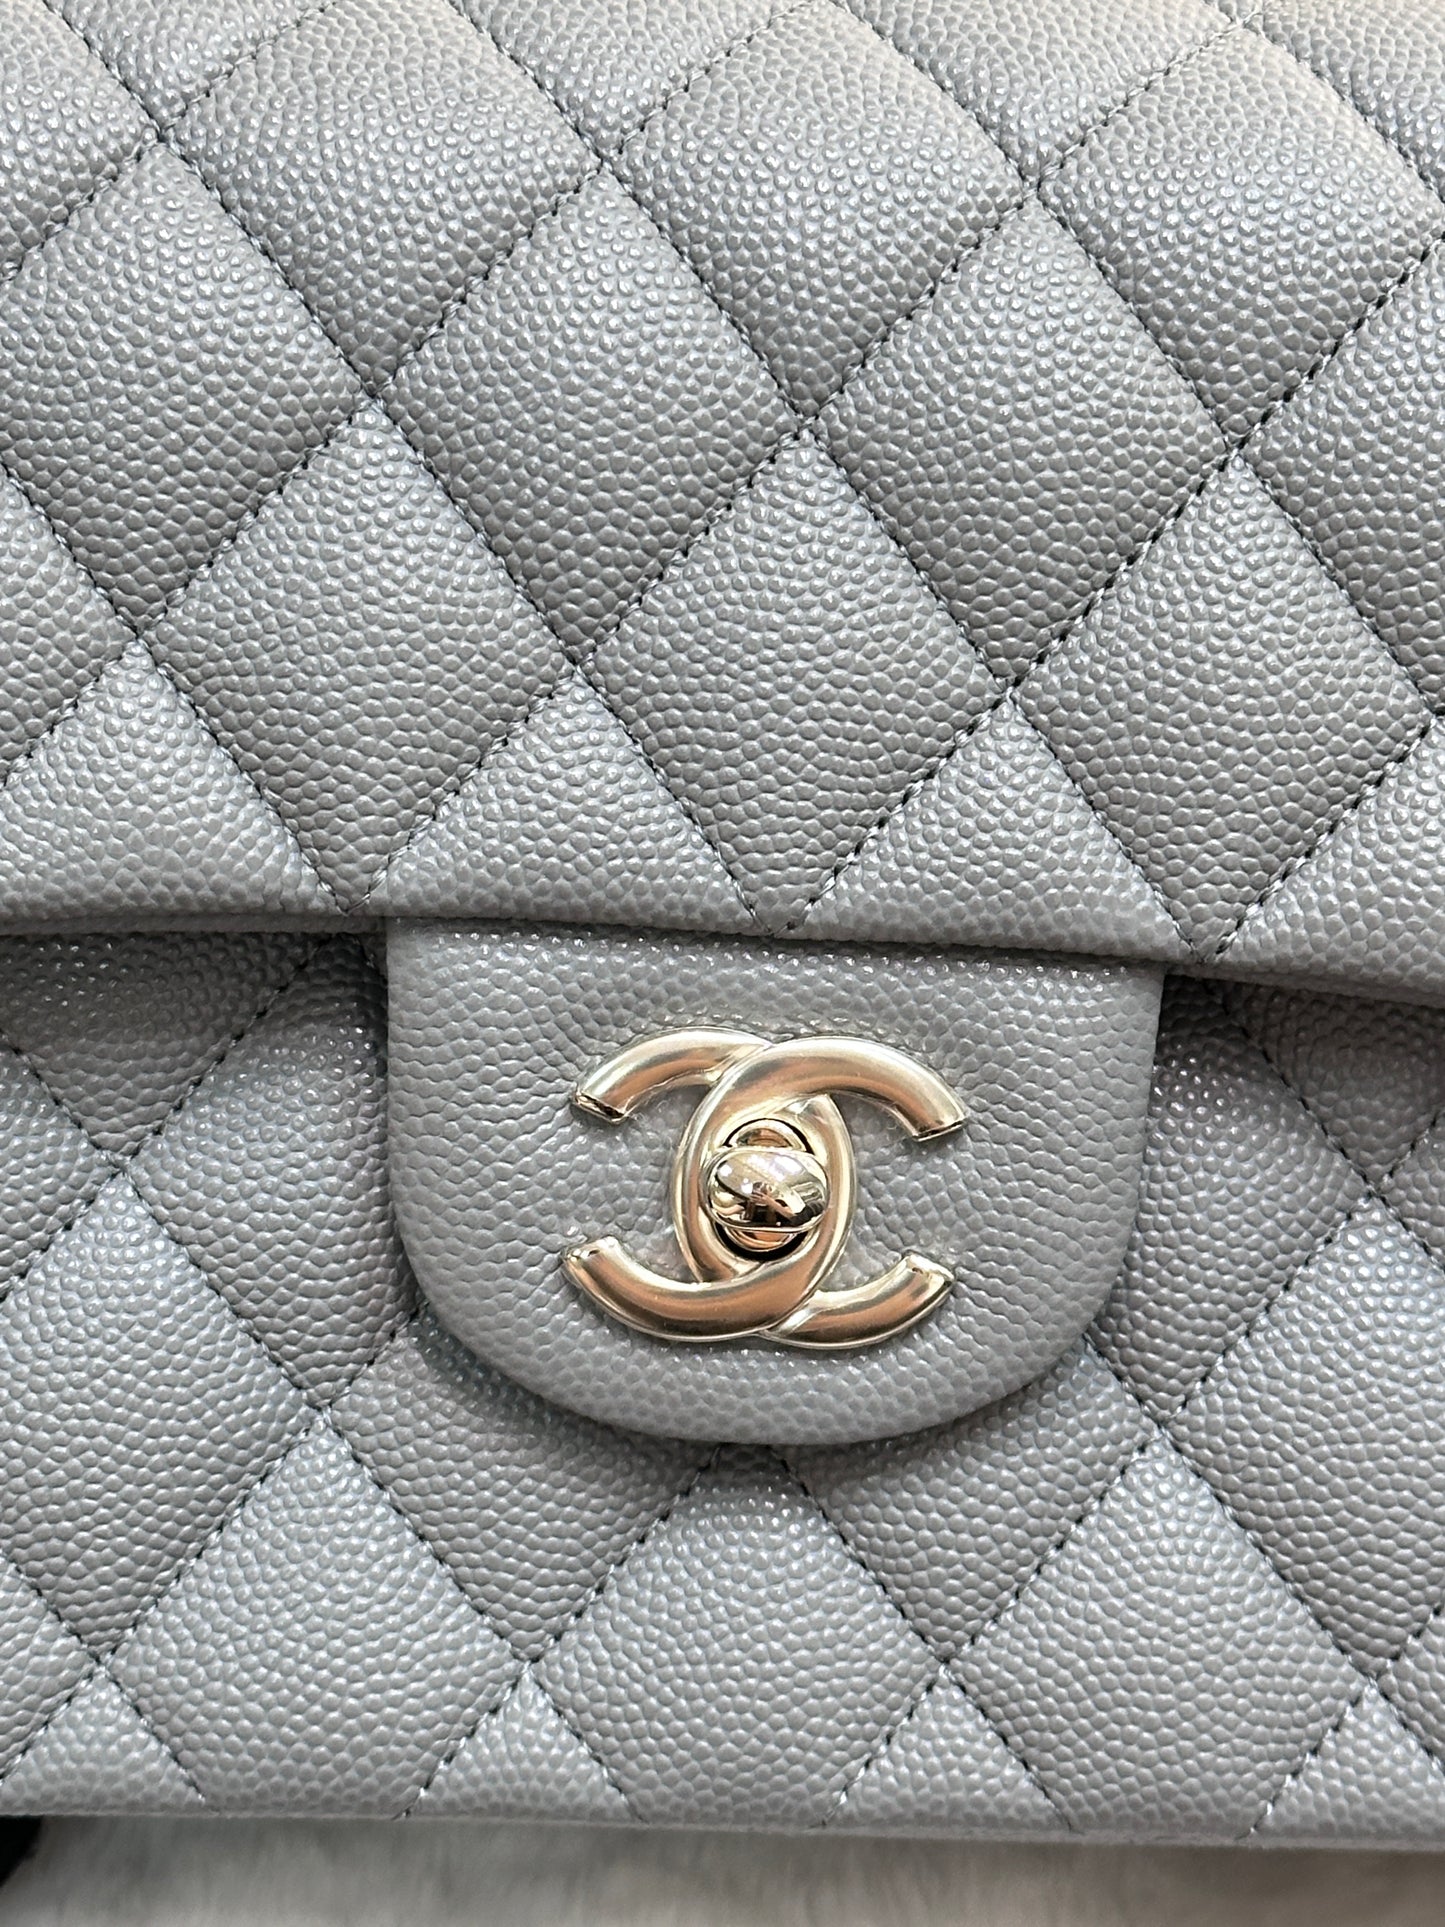 Chanel Small Caviar Quilted Double Flap Grey 21B Unused Condition